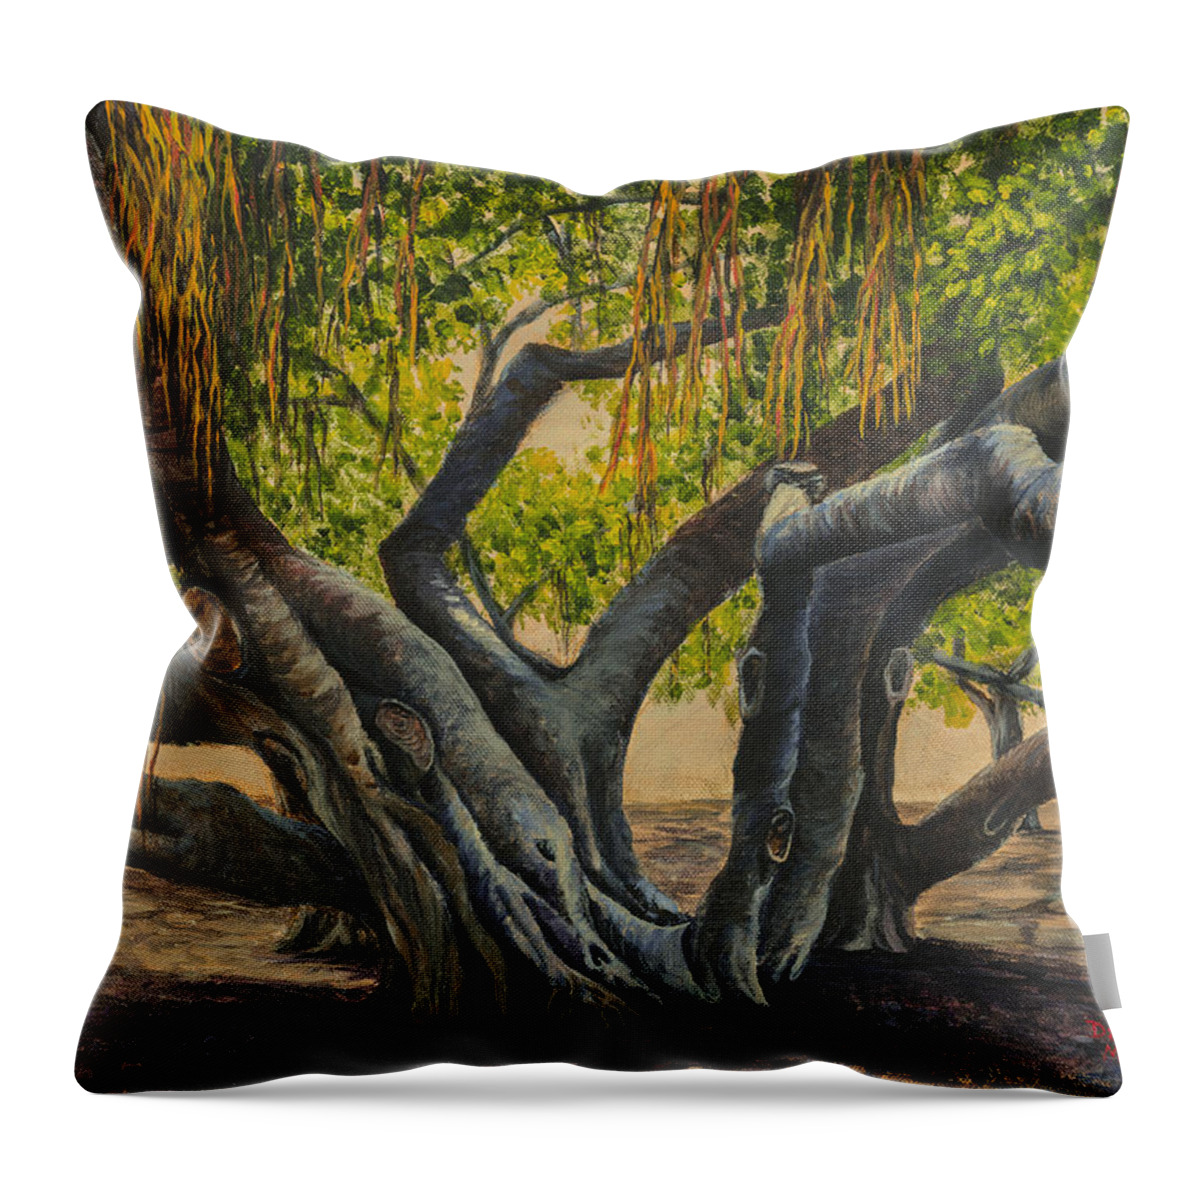 Landscape Throw Pillow featuring the painting Banyan Tree Maui by Darice Machel McGuire